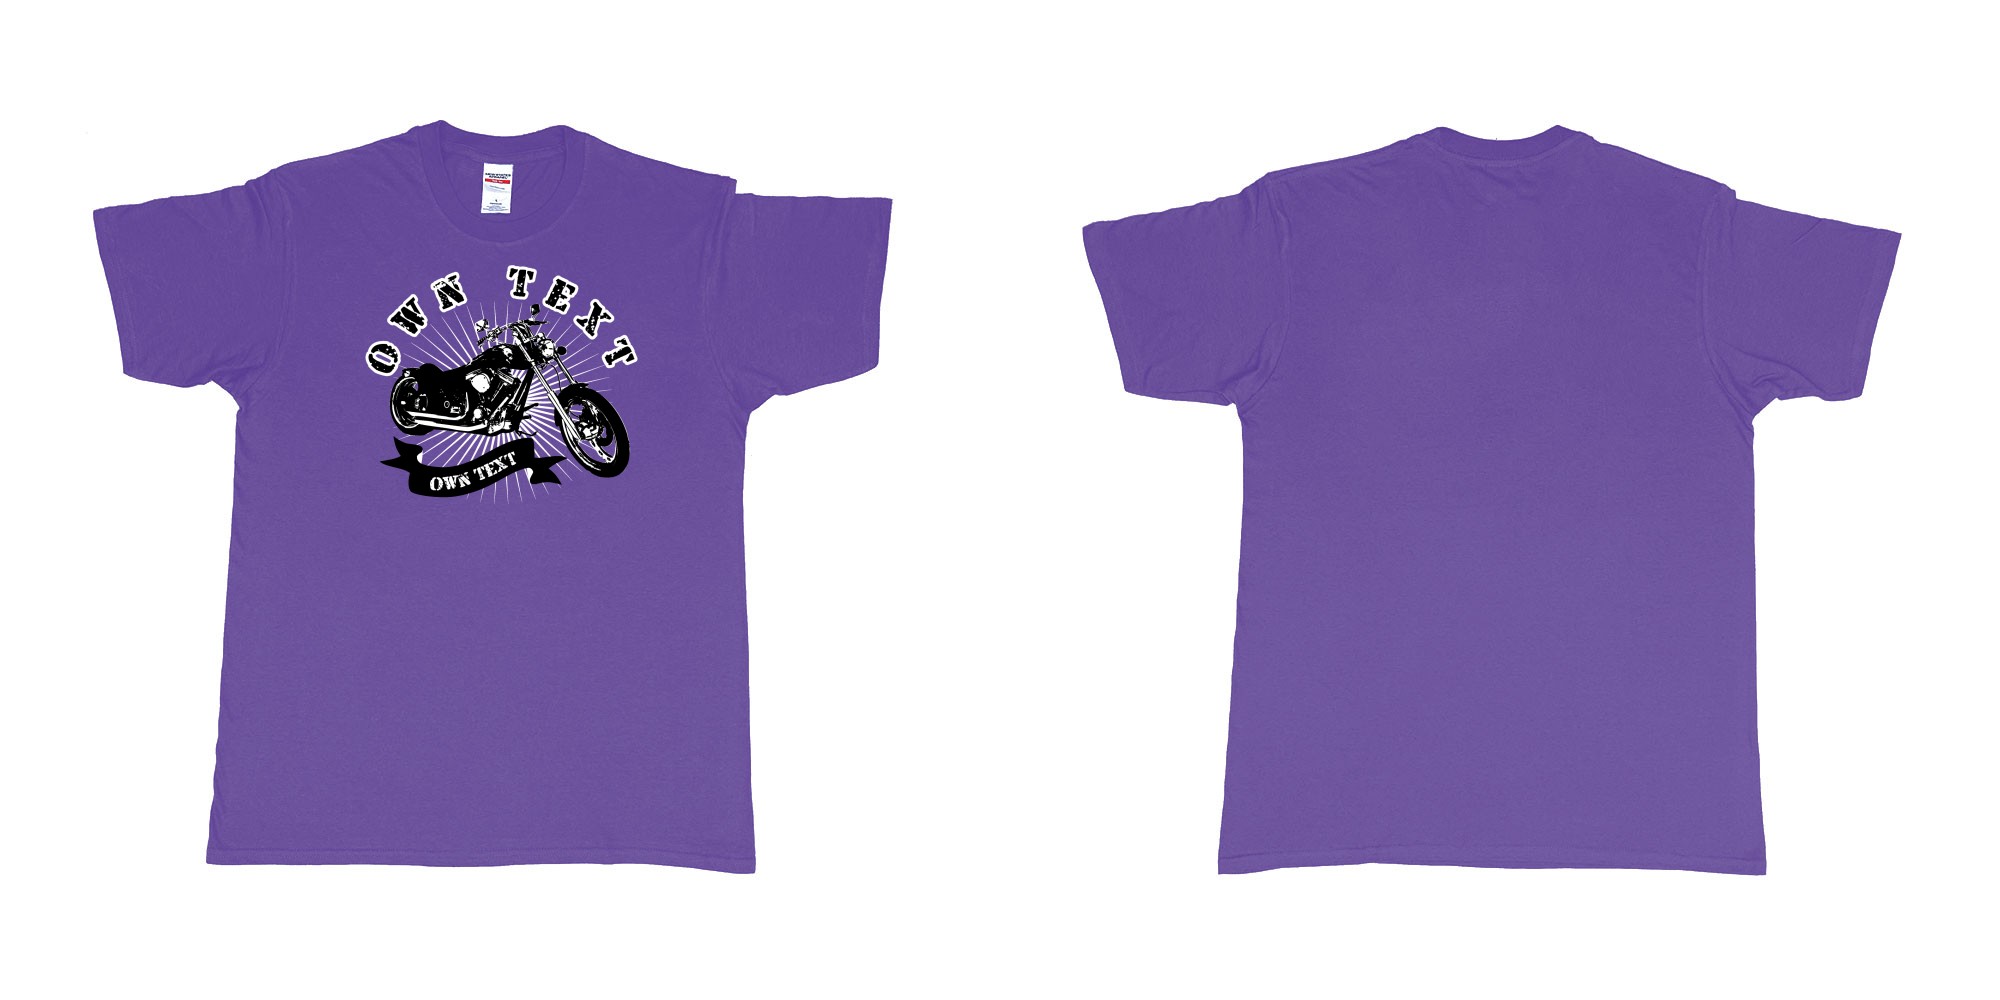 Custom tshirt design chopper motorcycle with your personalized own text printing in bali in fabric color purple choice your own text made in Bali by The Pirate Way